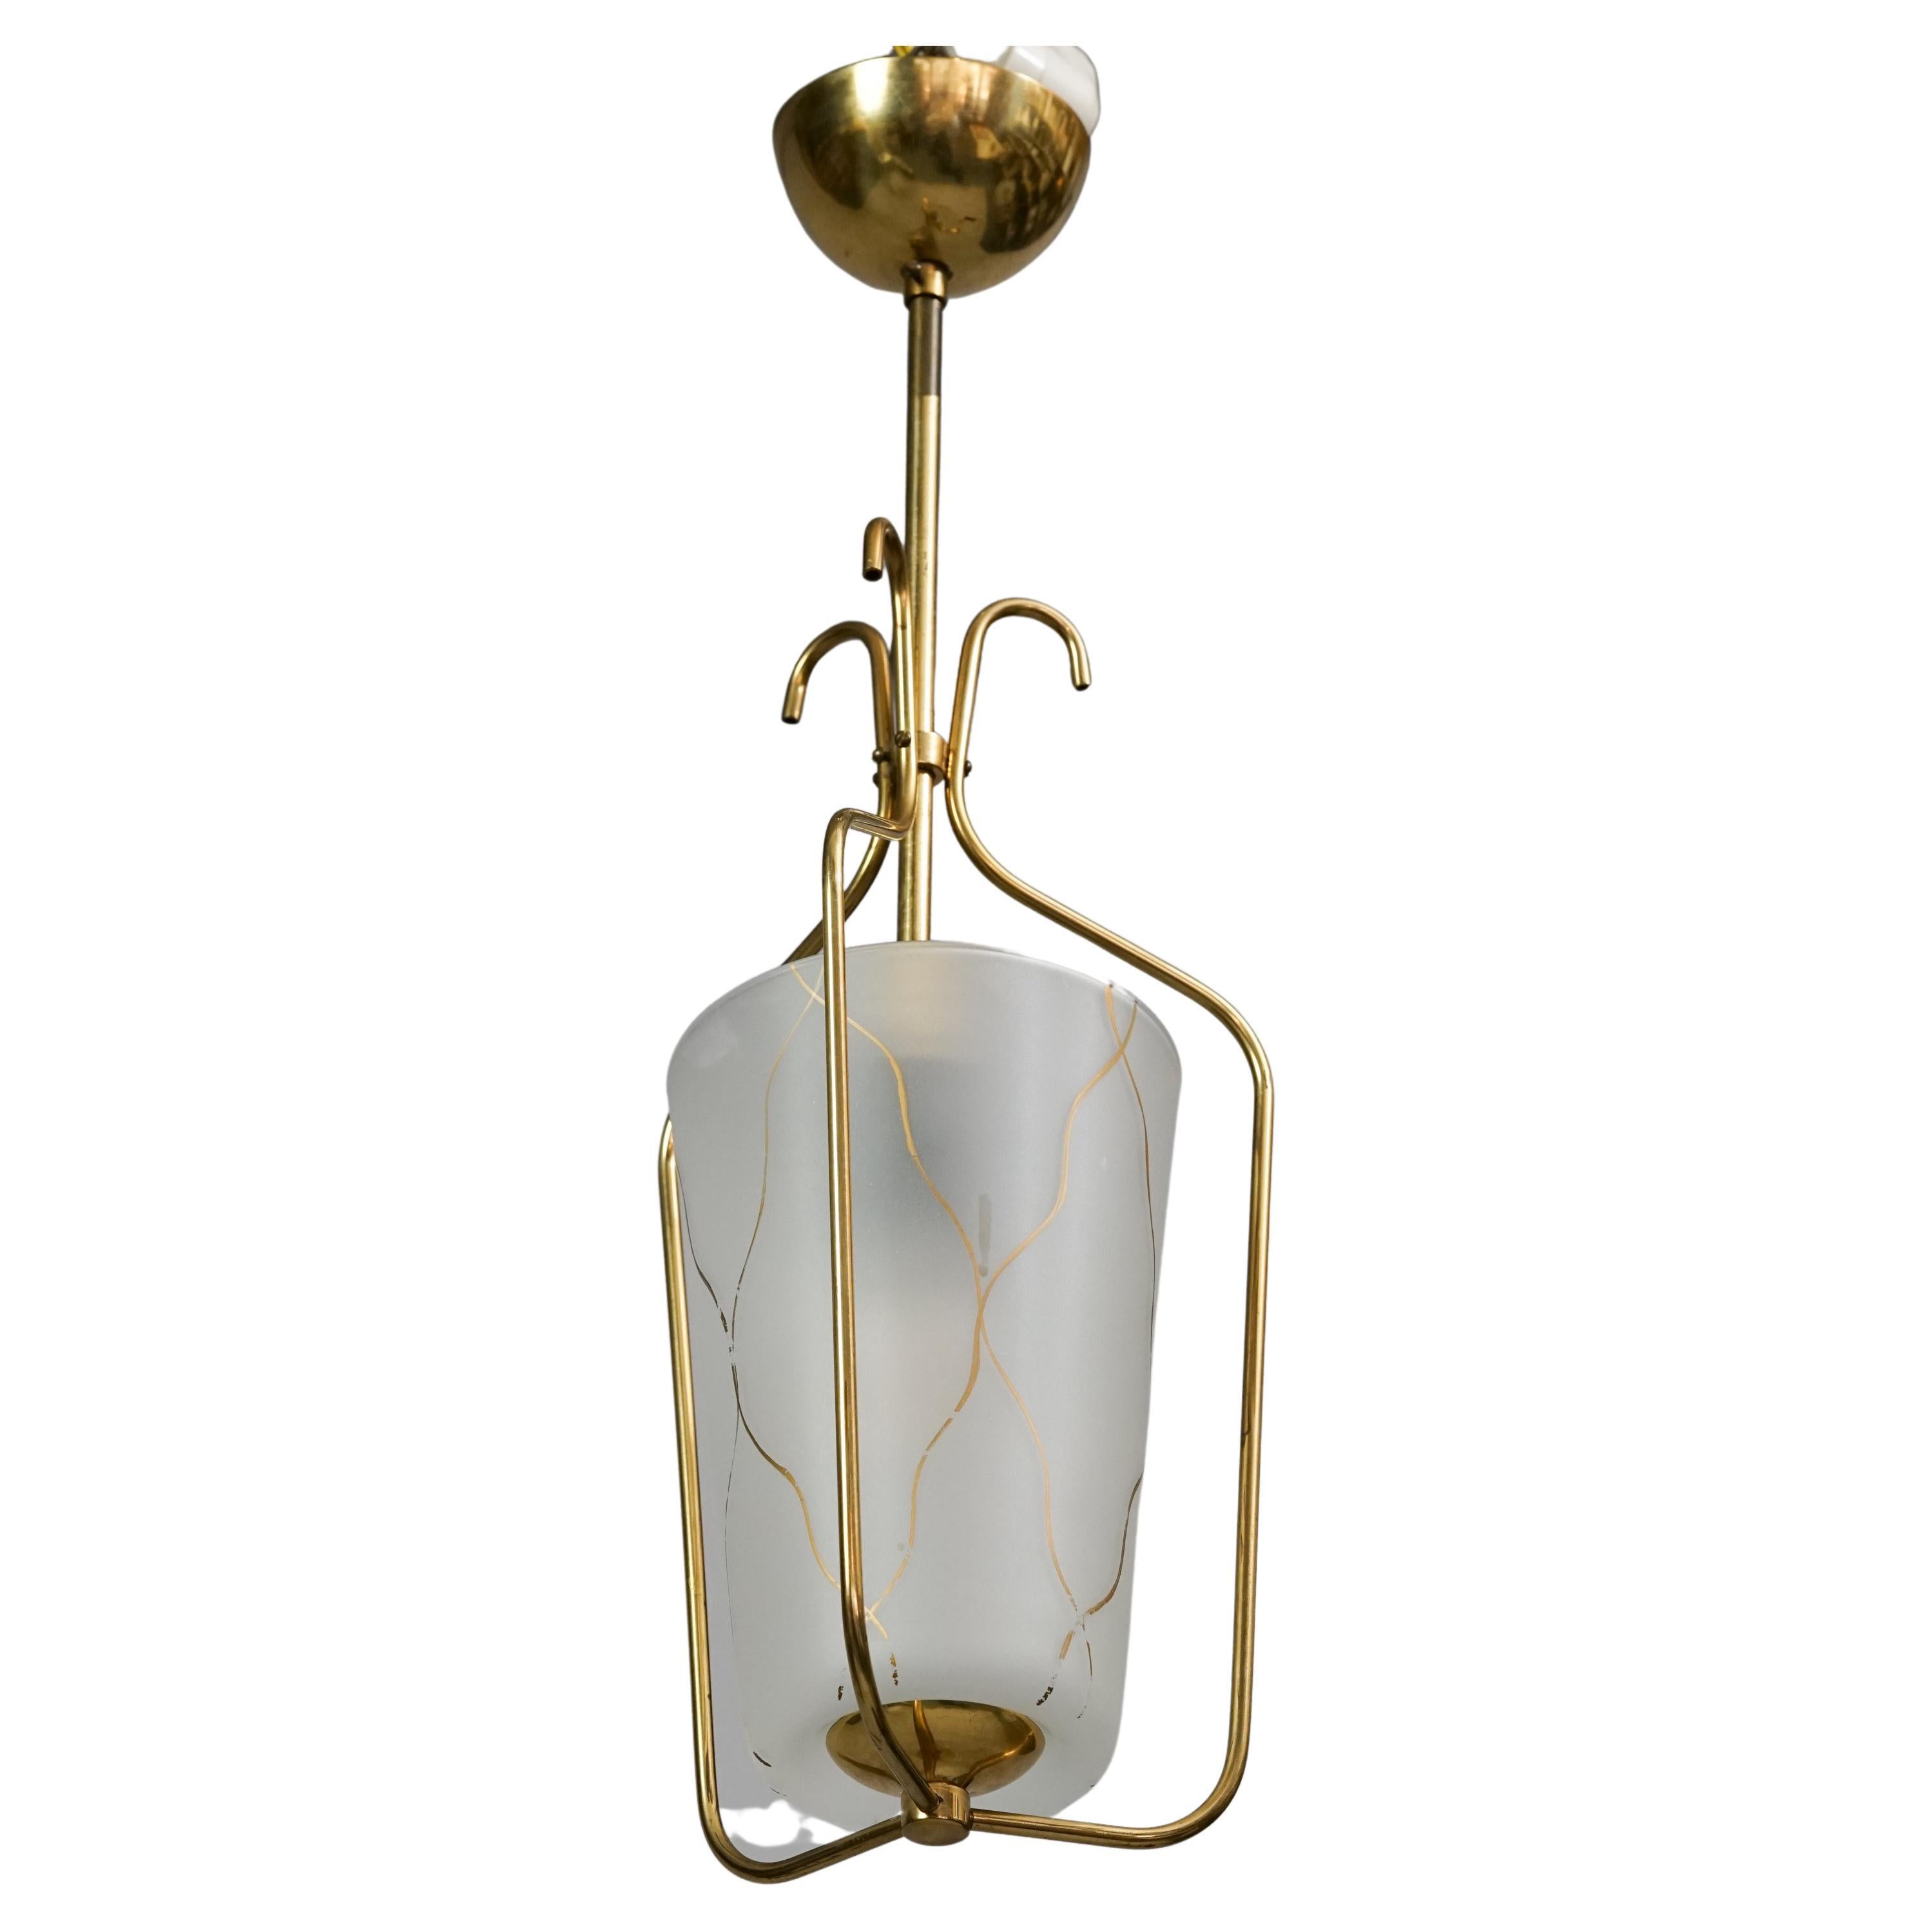 Finnish 1950s pendant with hand painted glass shade, brass frame. Good vintage condition, minor wear consistent with age and use. Beautiful and delicate design.